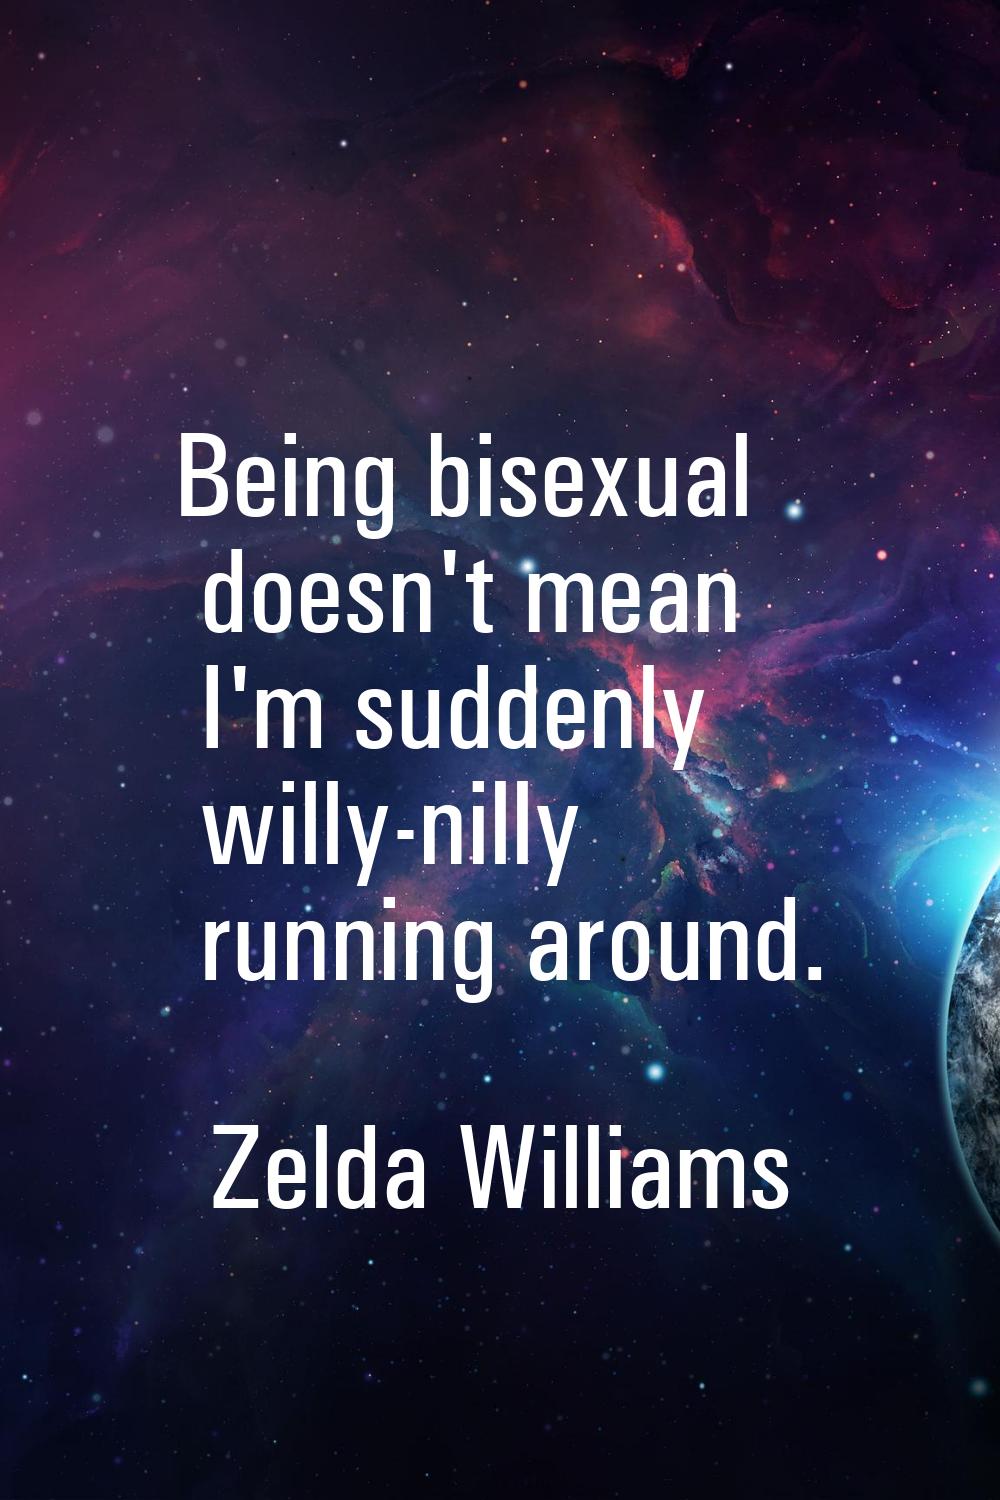 Being bisexual doesn't mean I'm suddenly willy-nilly running around.